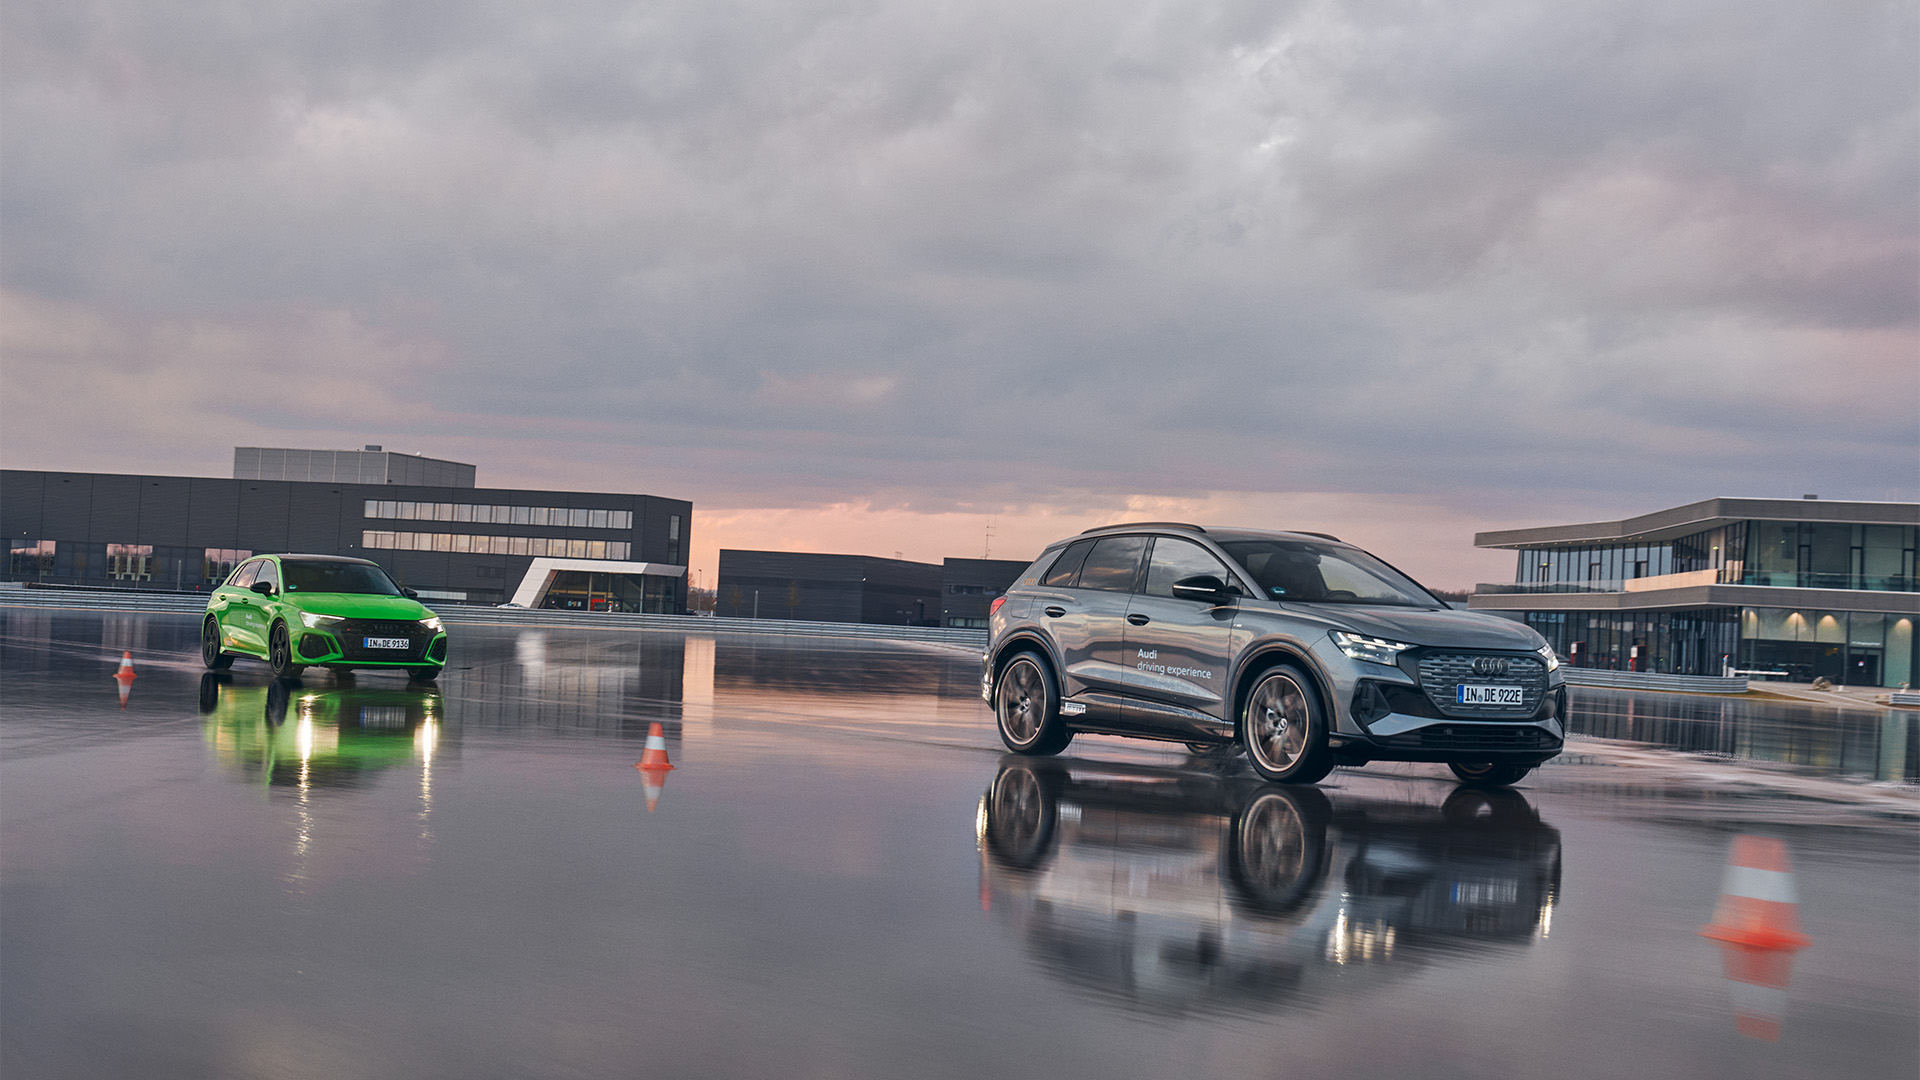 Green RS 3 Sportback and gray Q4 e-tron on wet roads